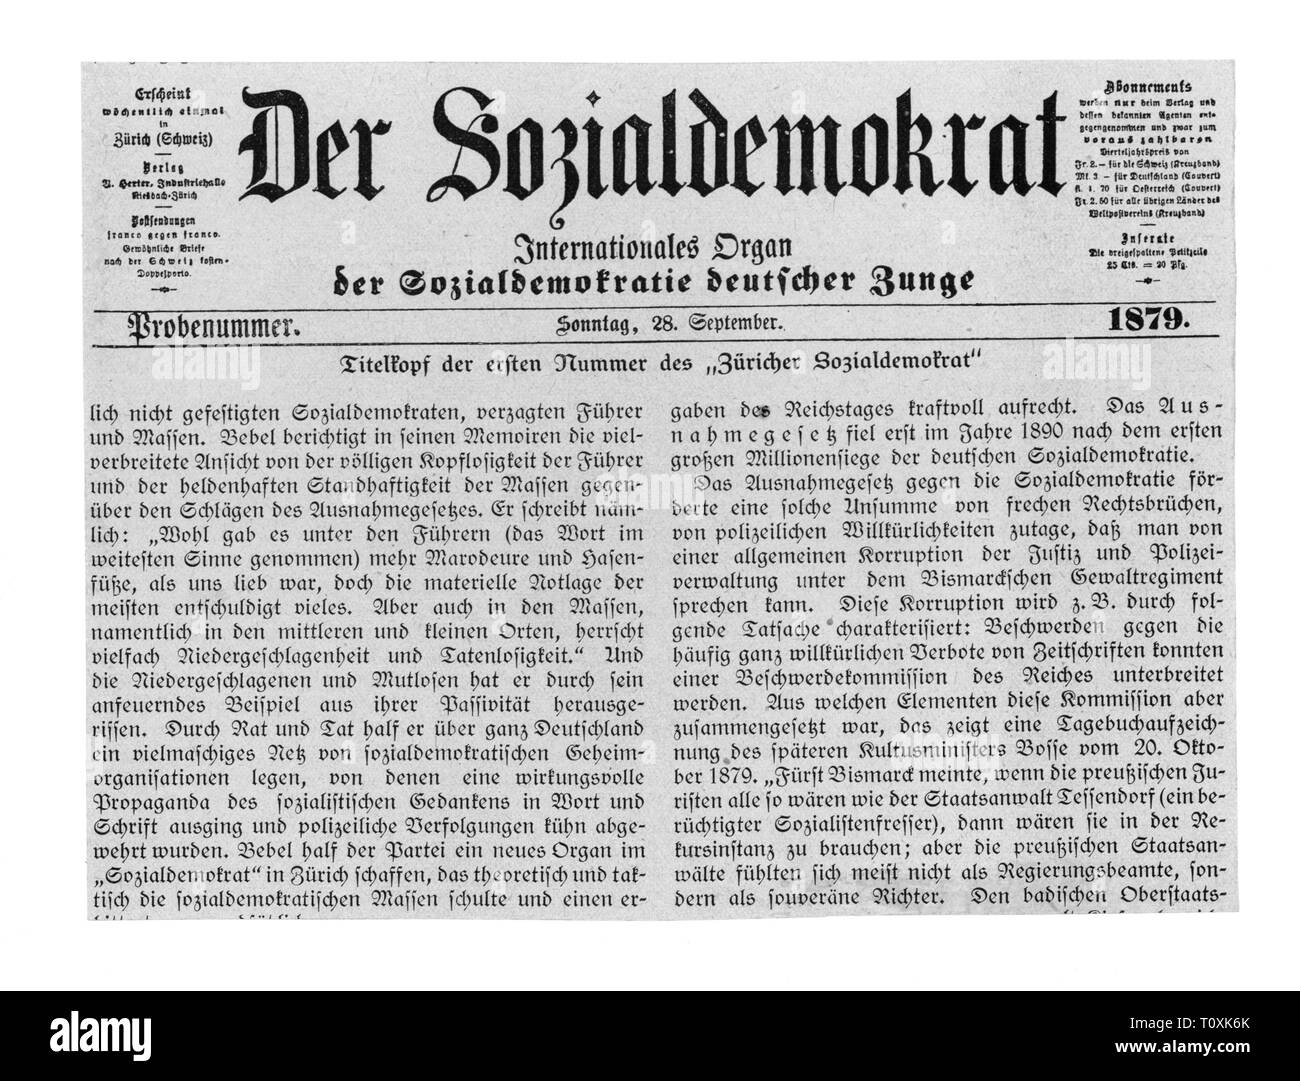 press / media, magazines, 'Der Sozialdemokrat' (The Social Democrat), front page, editor: Paul Singer (1844 - 1911), specimen number, Zurich, 28.9.1879, Artist's Copyright has not to be cleared Stock Photo